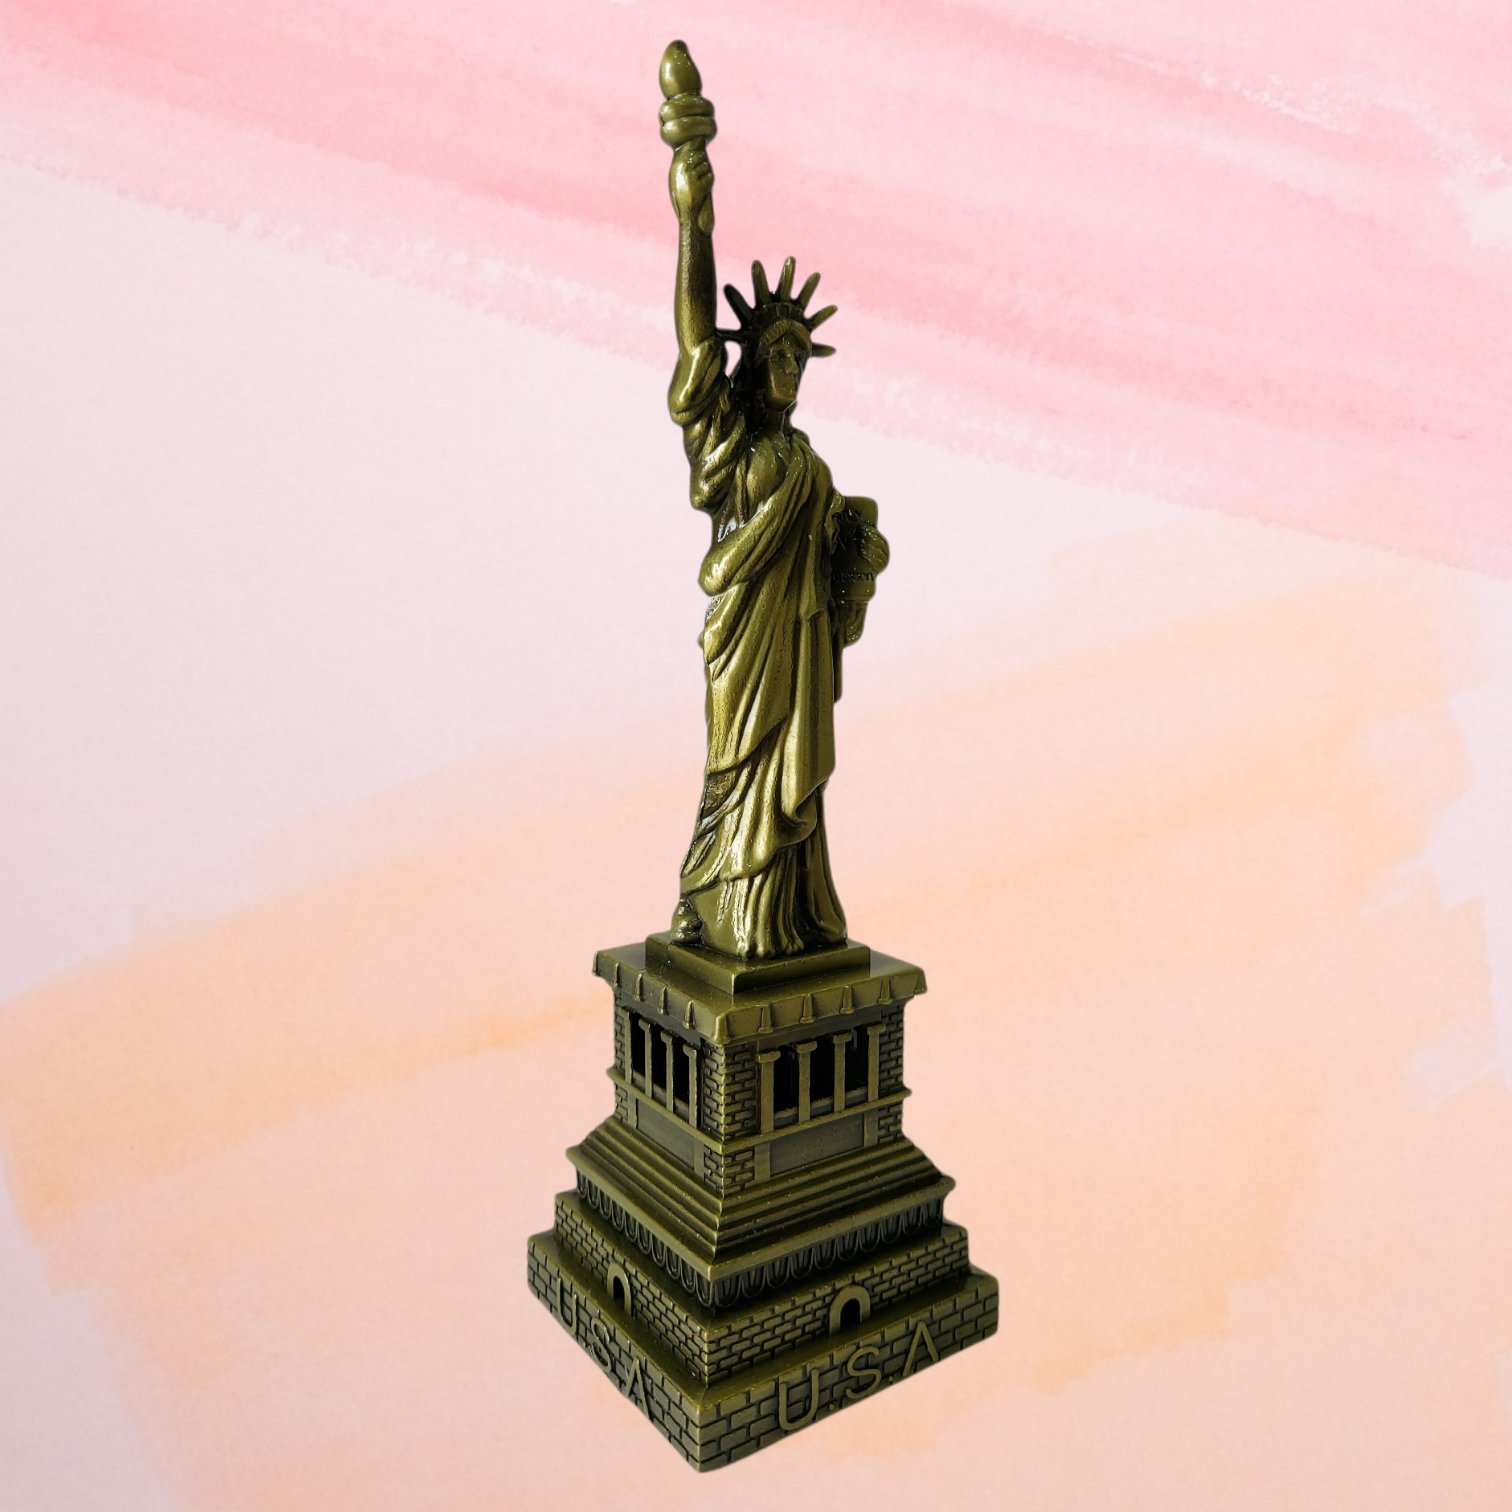 FunkyTradition Statue of Liberty New York City Showpiece for Home Office Decor and Anniversary Birthday Gifts